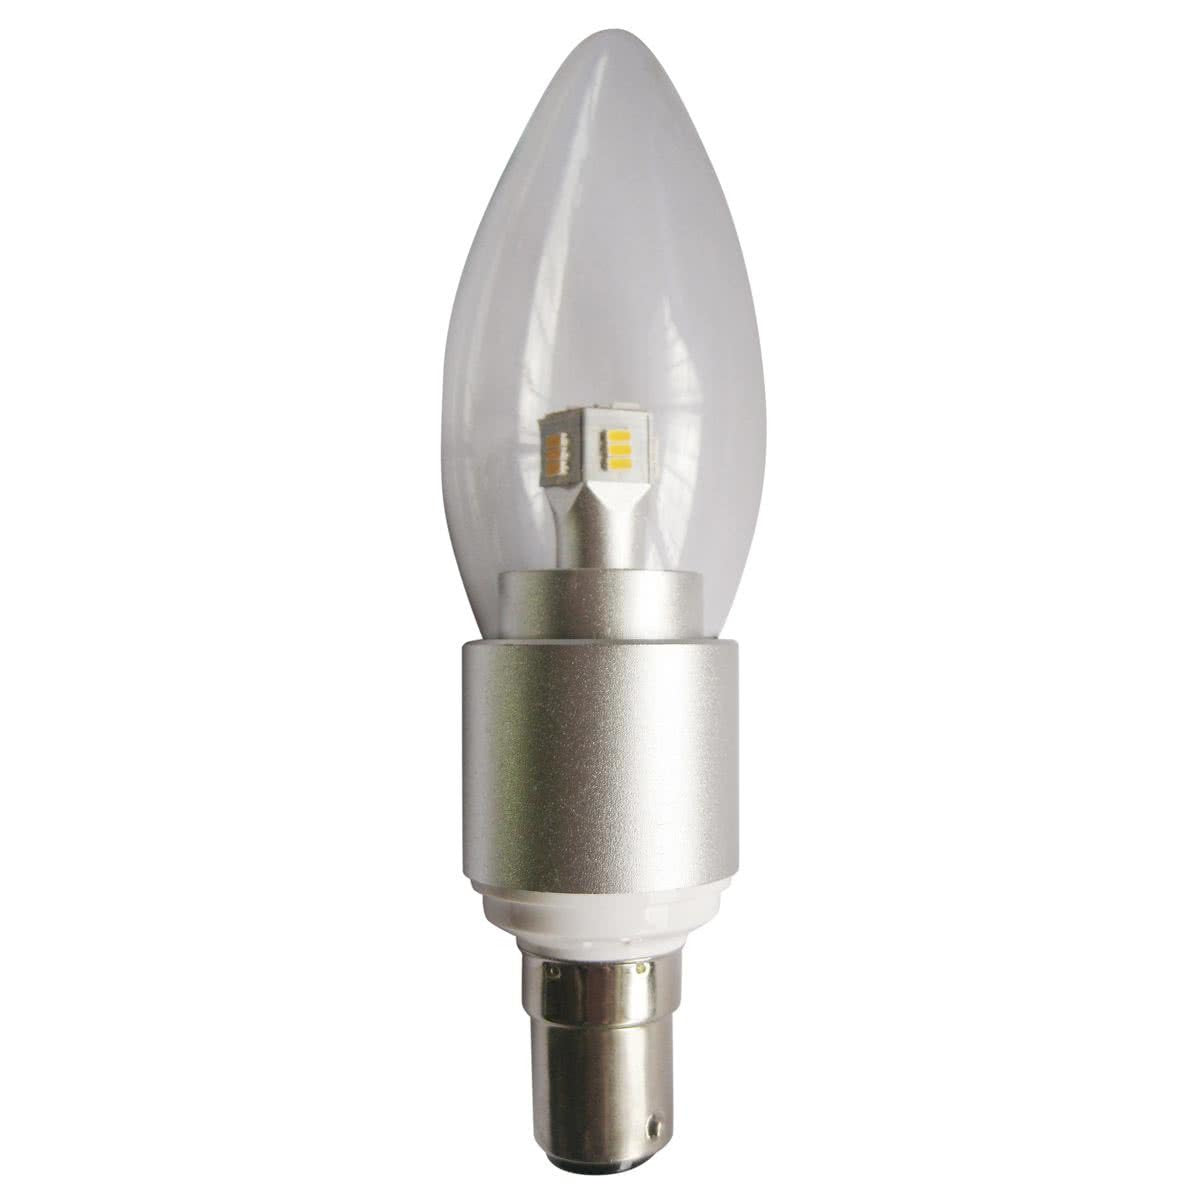 Candle B15 4w LED Dimmable Globe 310 Lumen 5000k